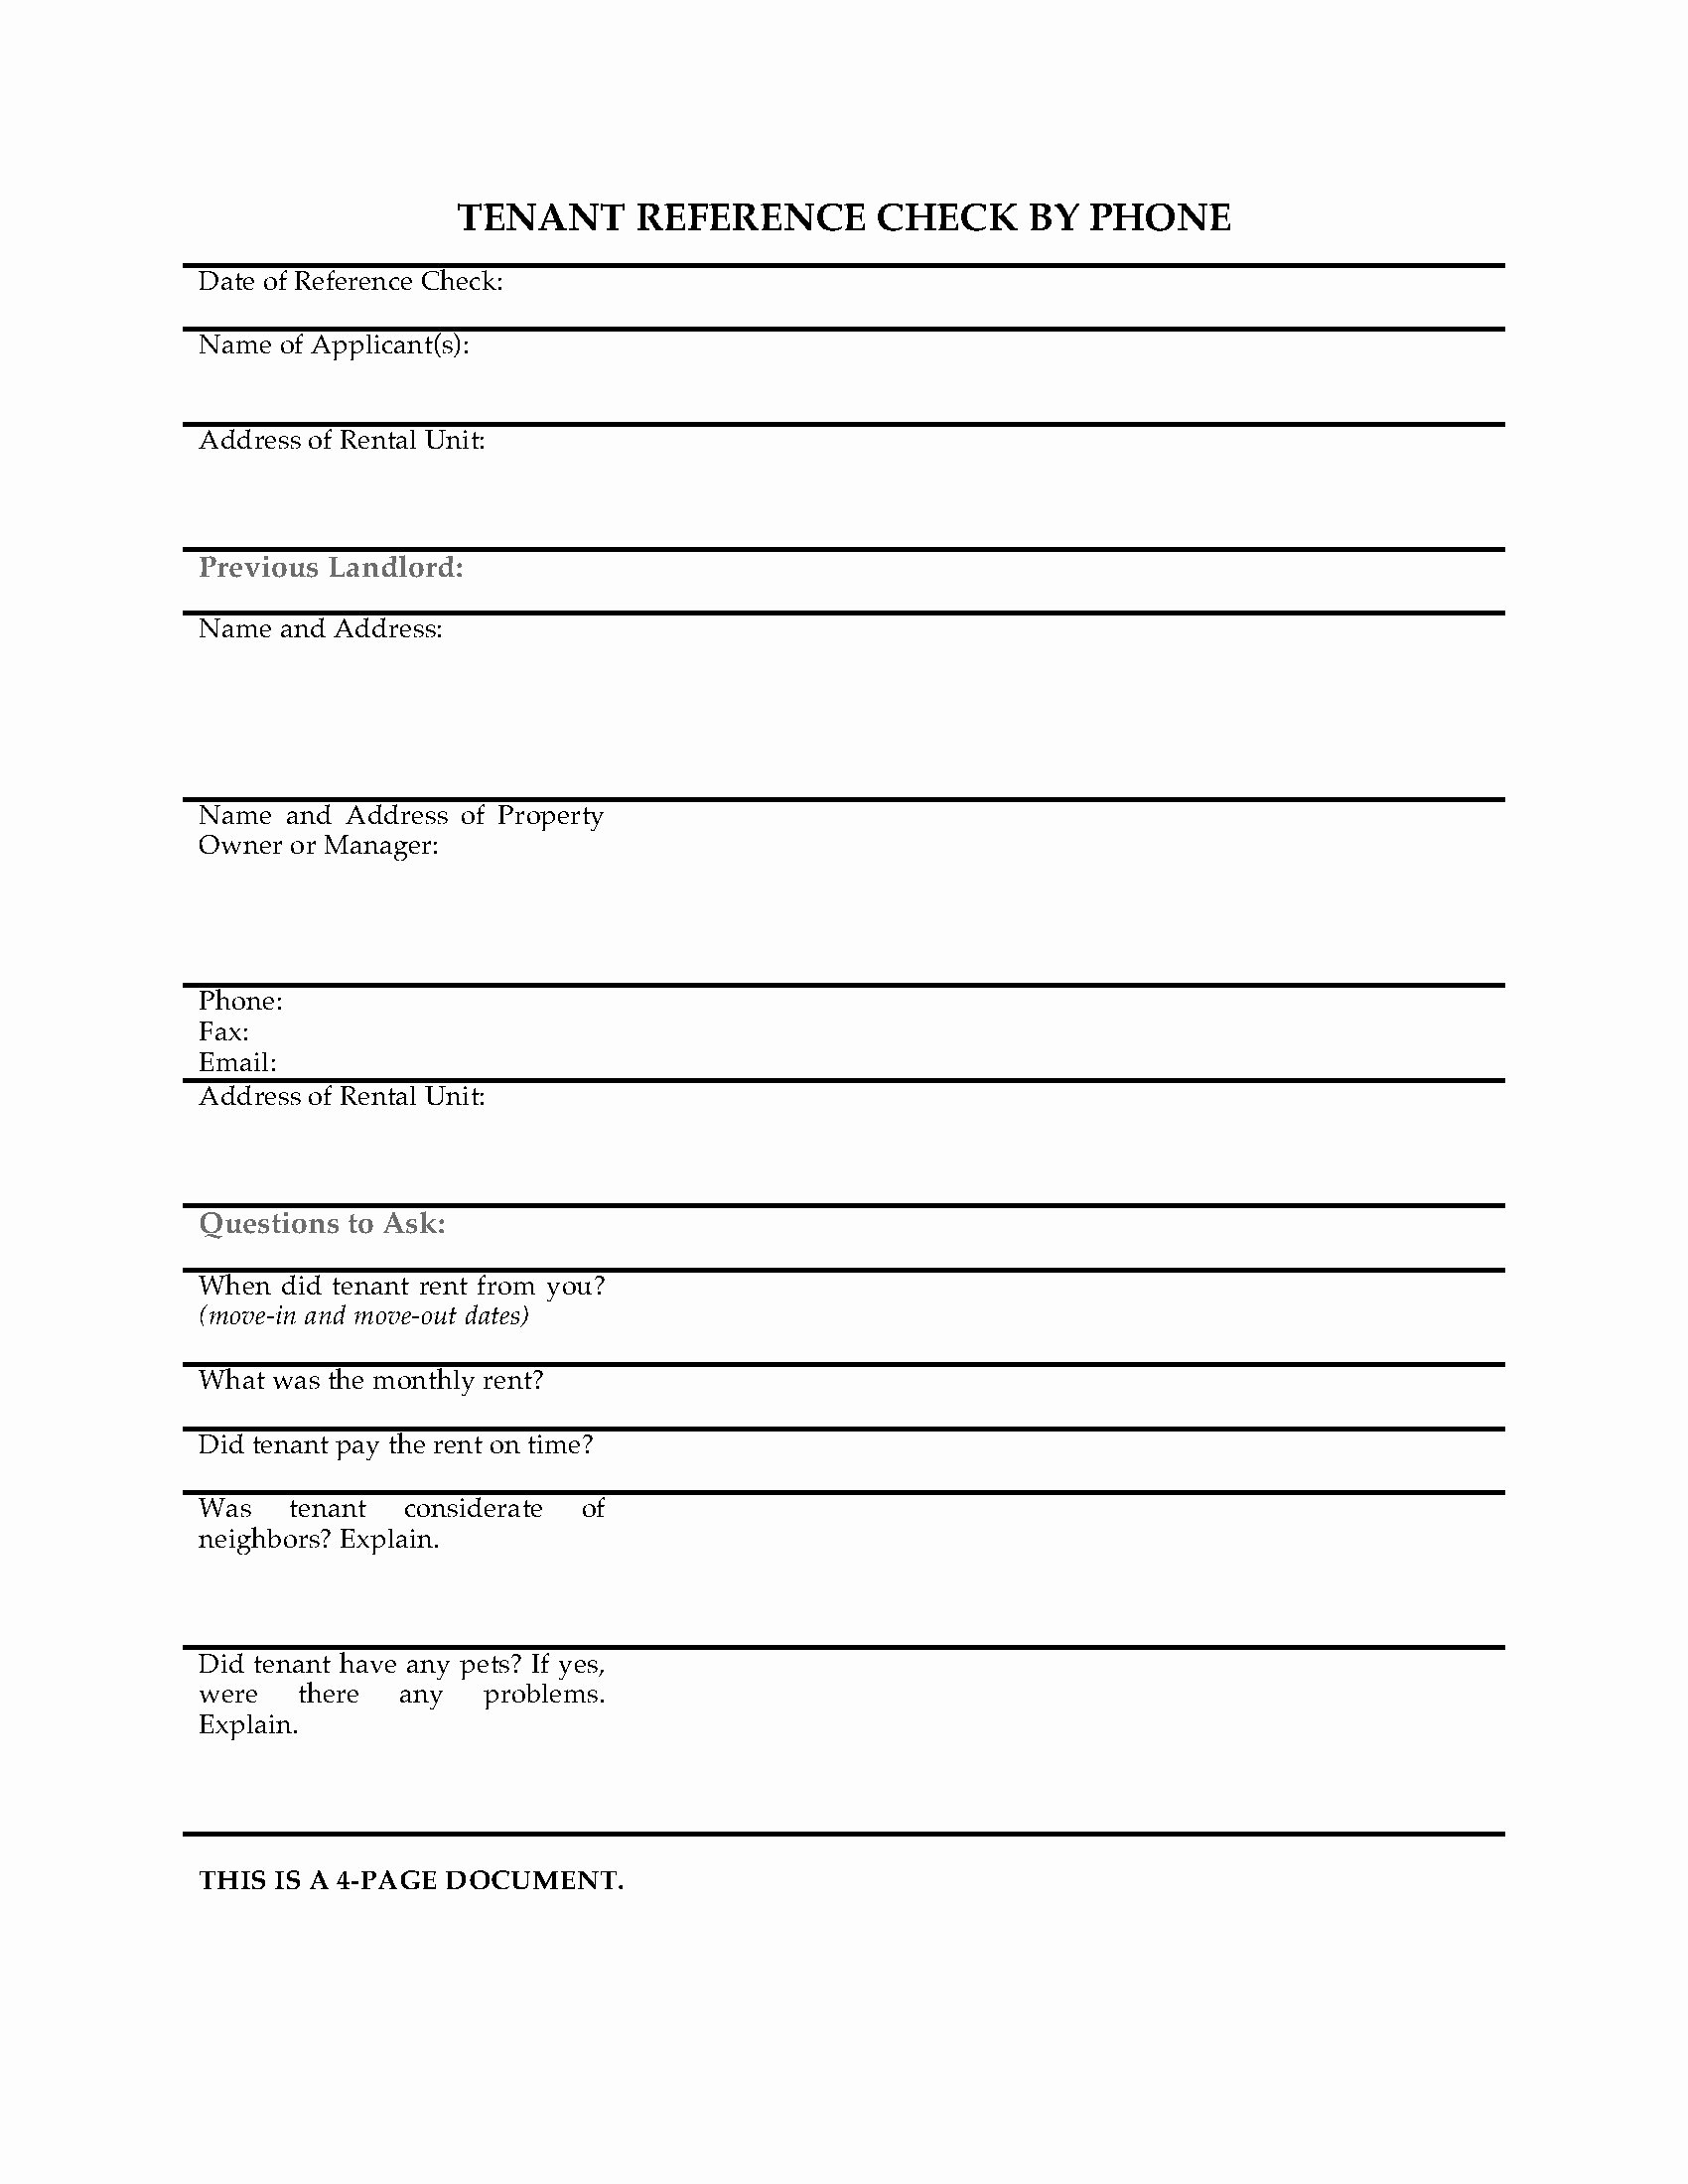 Reference Check form Template Inspirational Tenant Reference Check by Phone